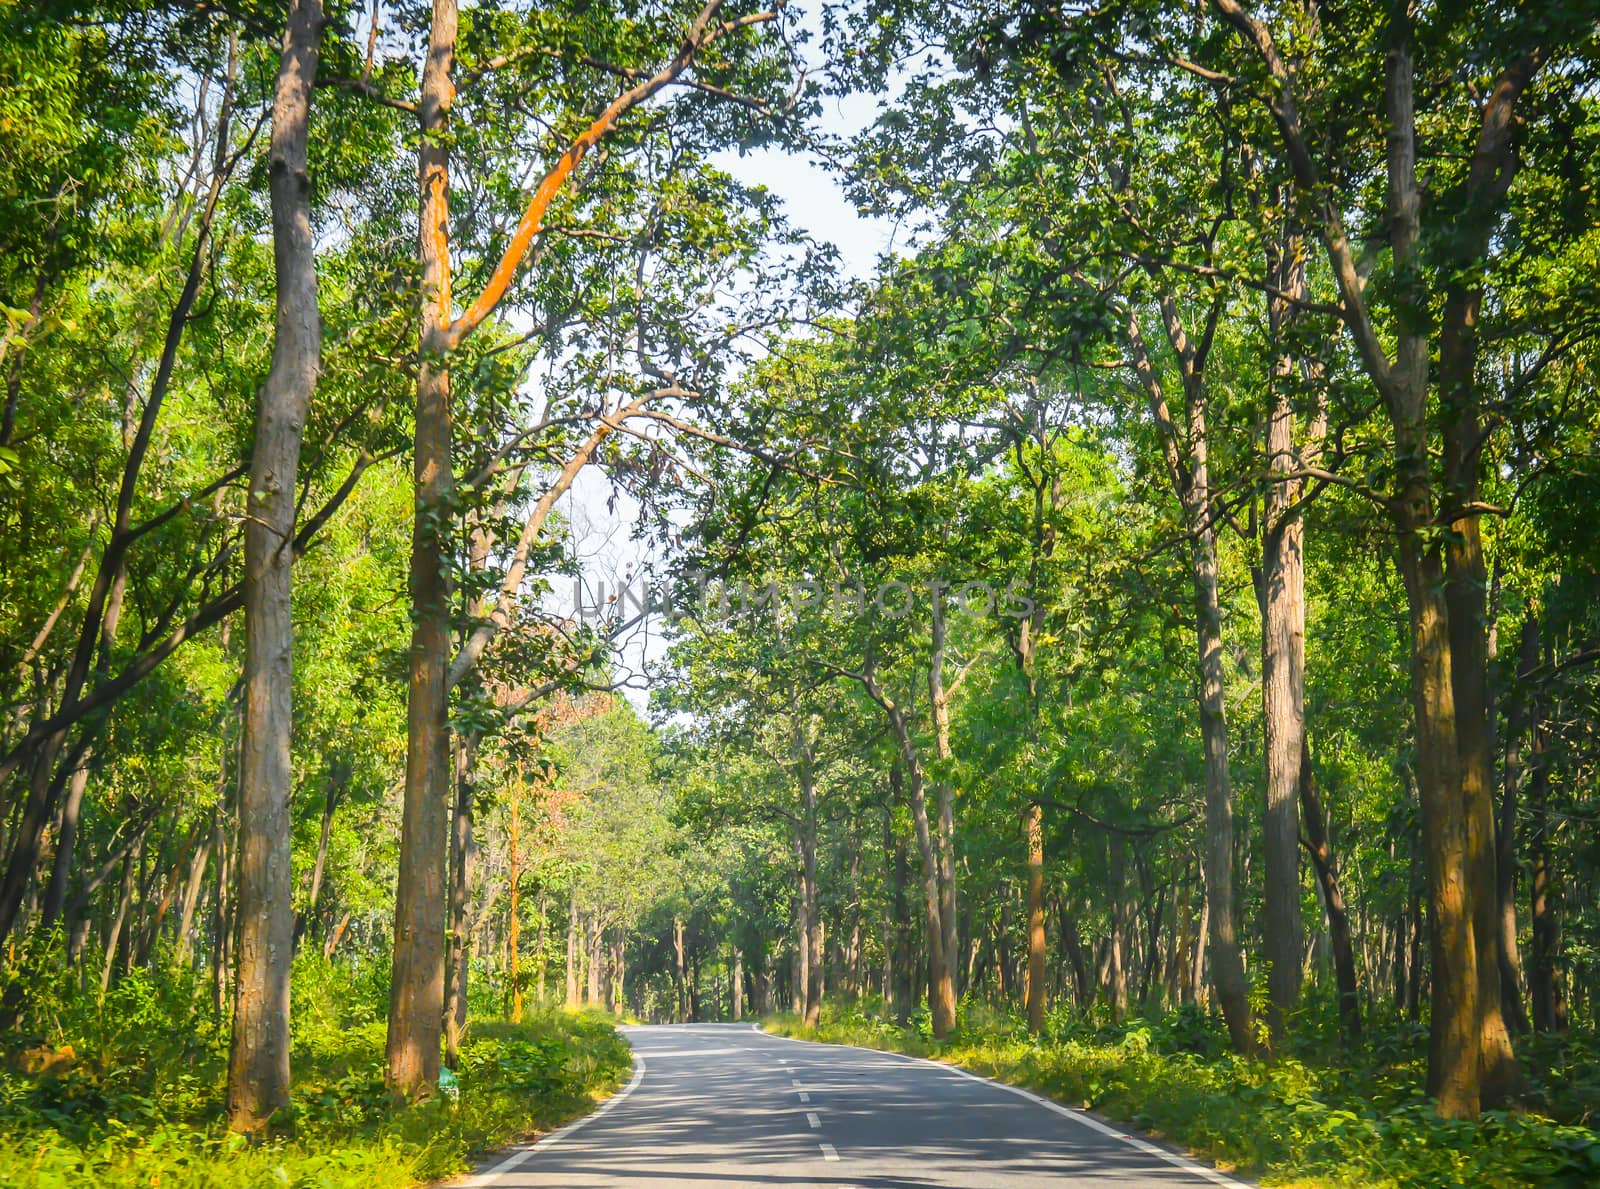 The paved road that cuts through the forest of fresh green tree by sudiptabhowmick